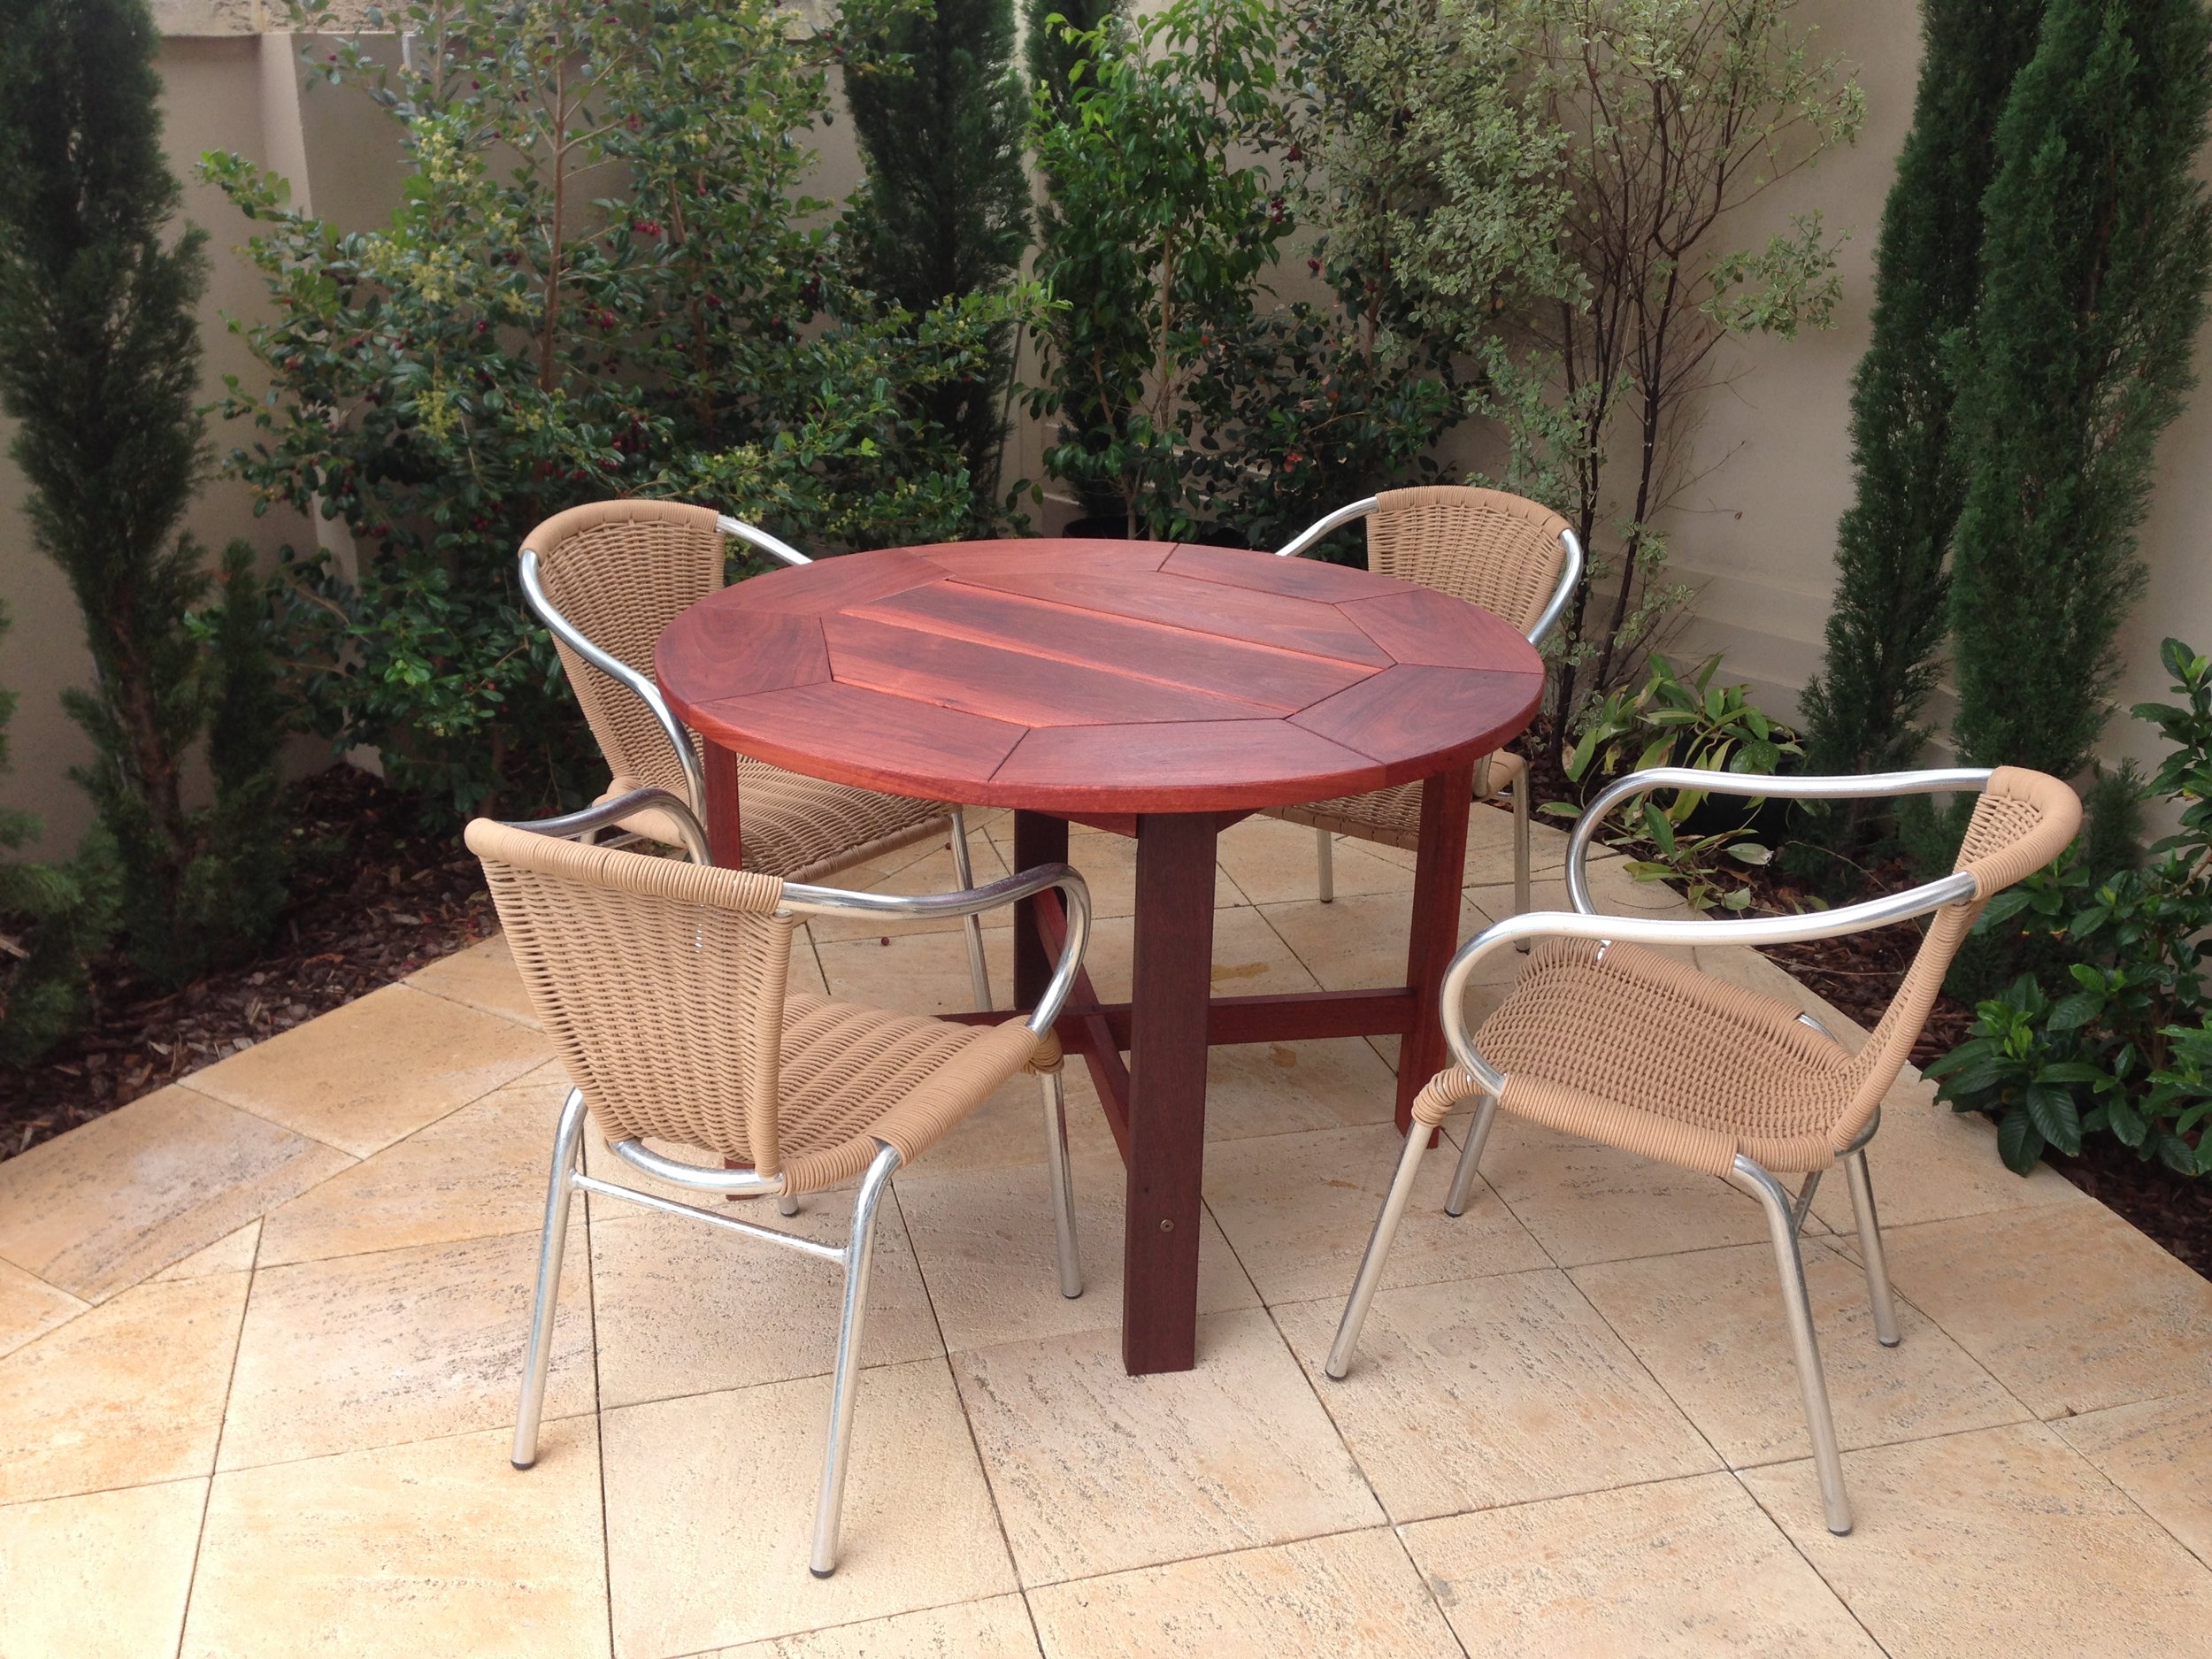  Round tables can be made at any size to suit your space - we have made round tables from 900mm for a balcony to 2200mm in diameter for a large family who regularly get together.&nbsp; 